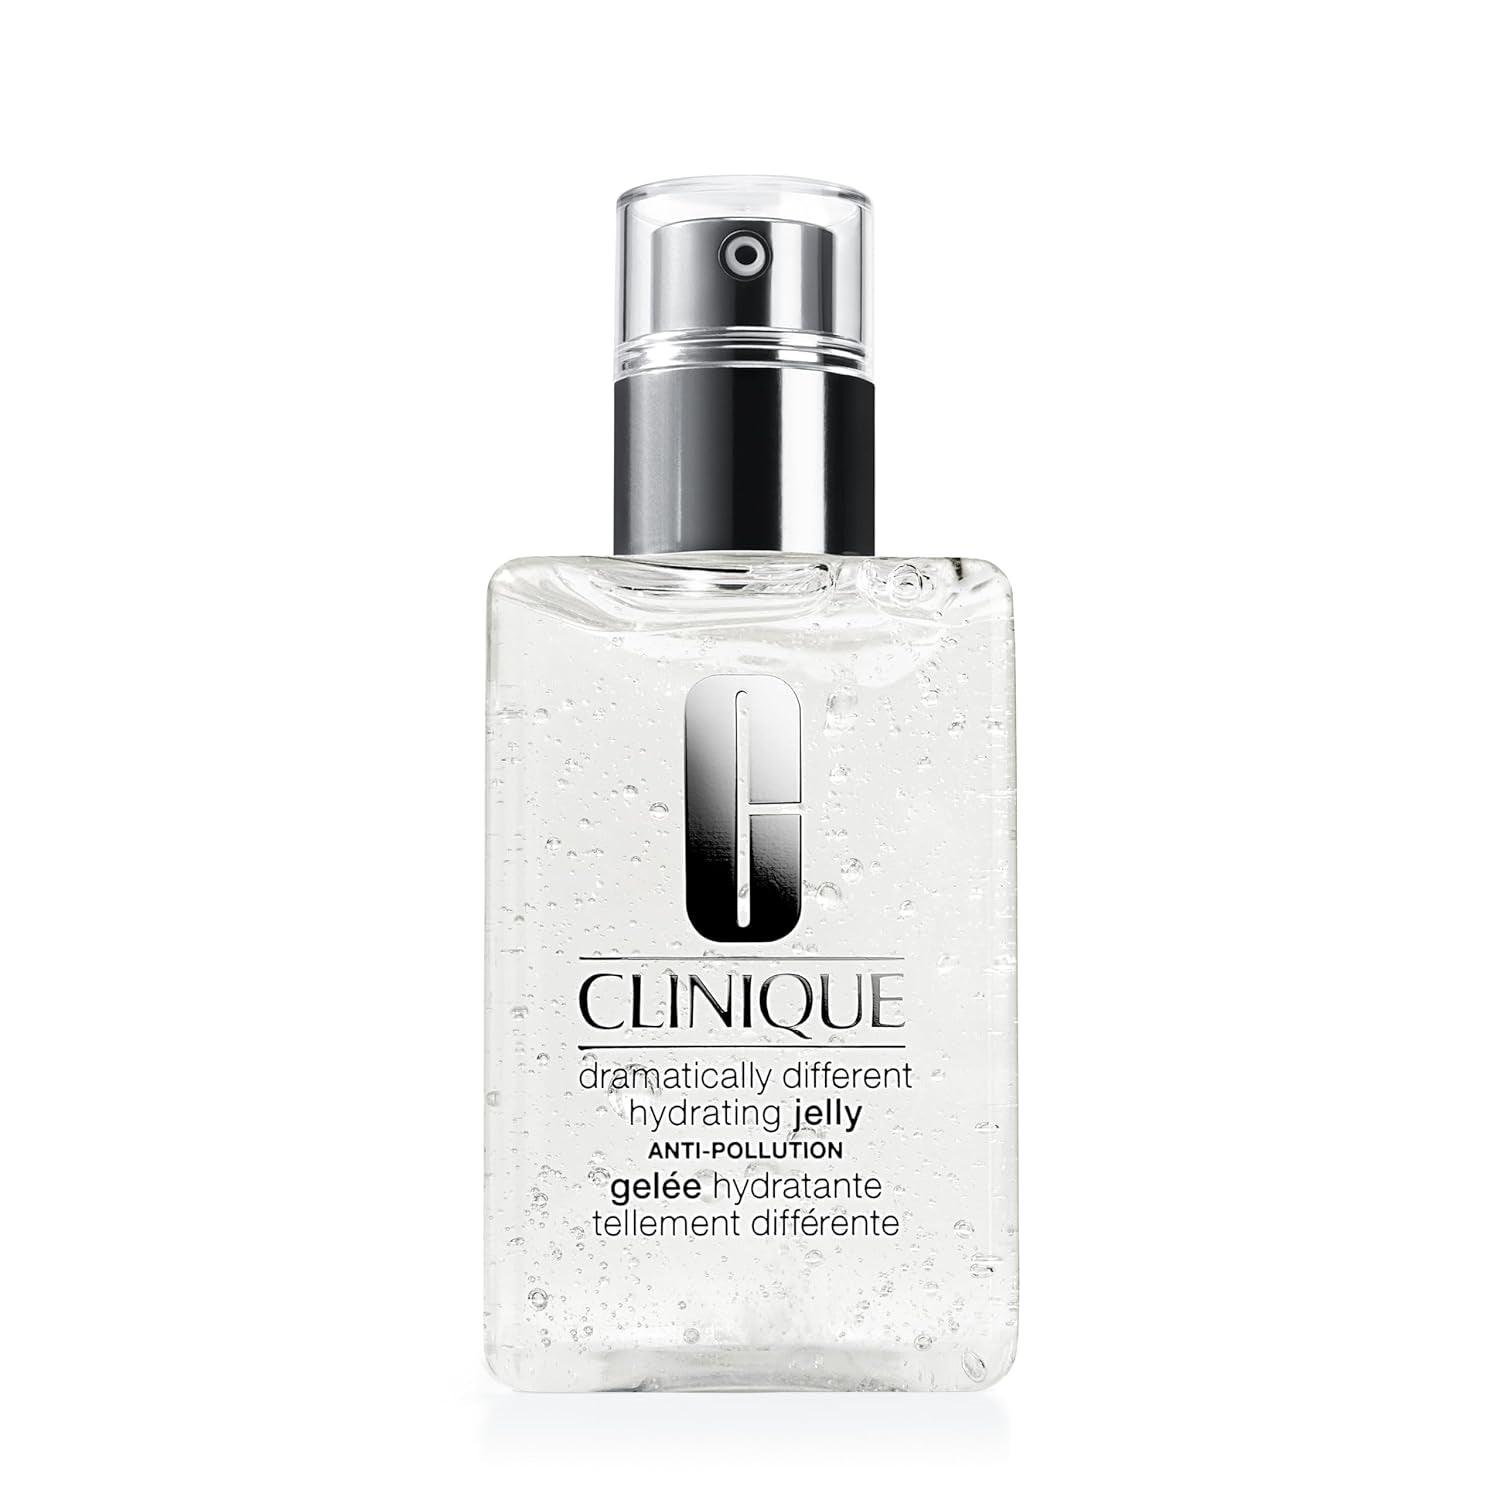 Clinique Dramatically Different Hydrating Jelly Facial Moisturizer